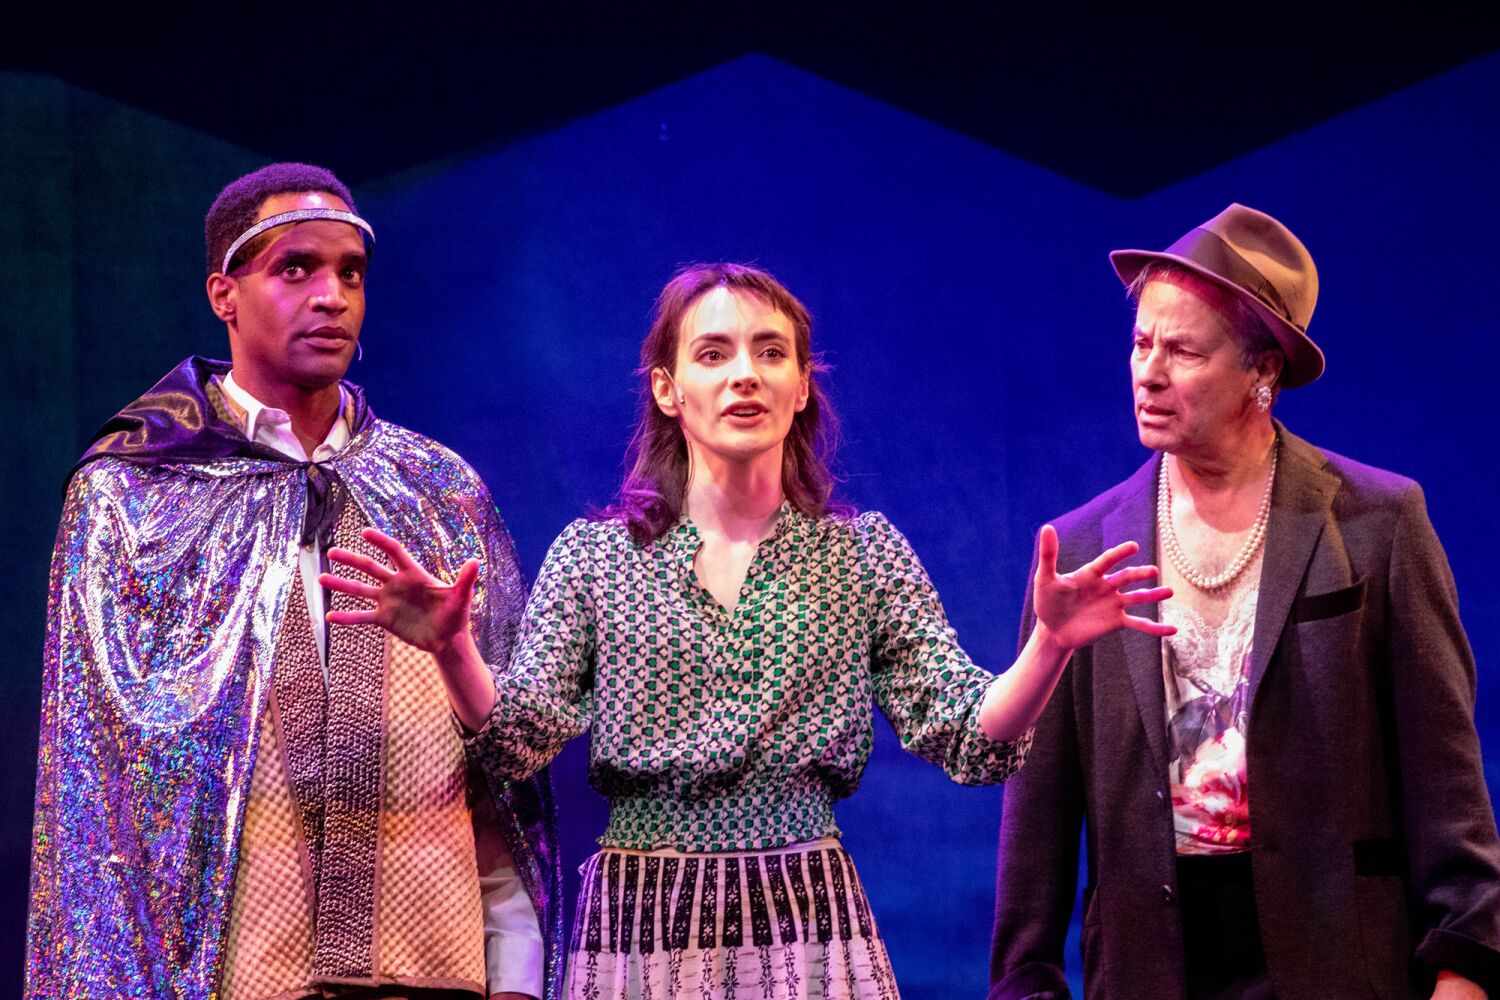 Review: Why the new intergalactic musical 'Come Get Maggie' is light-years from being ready 